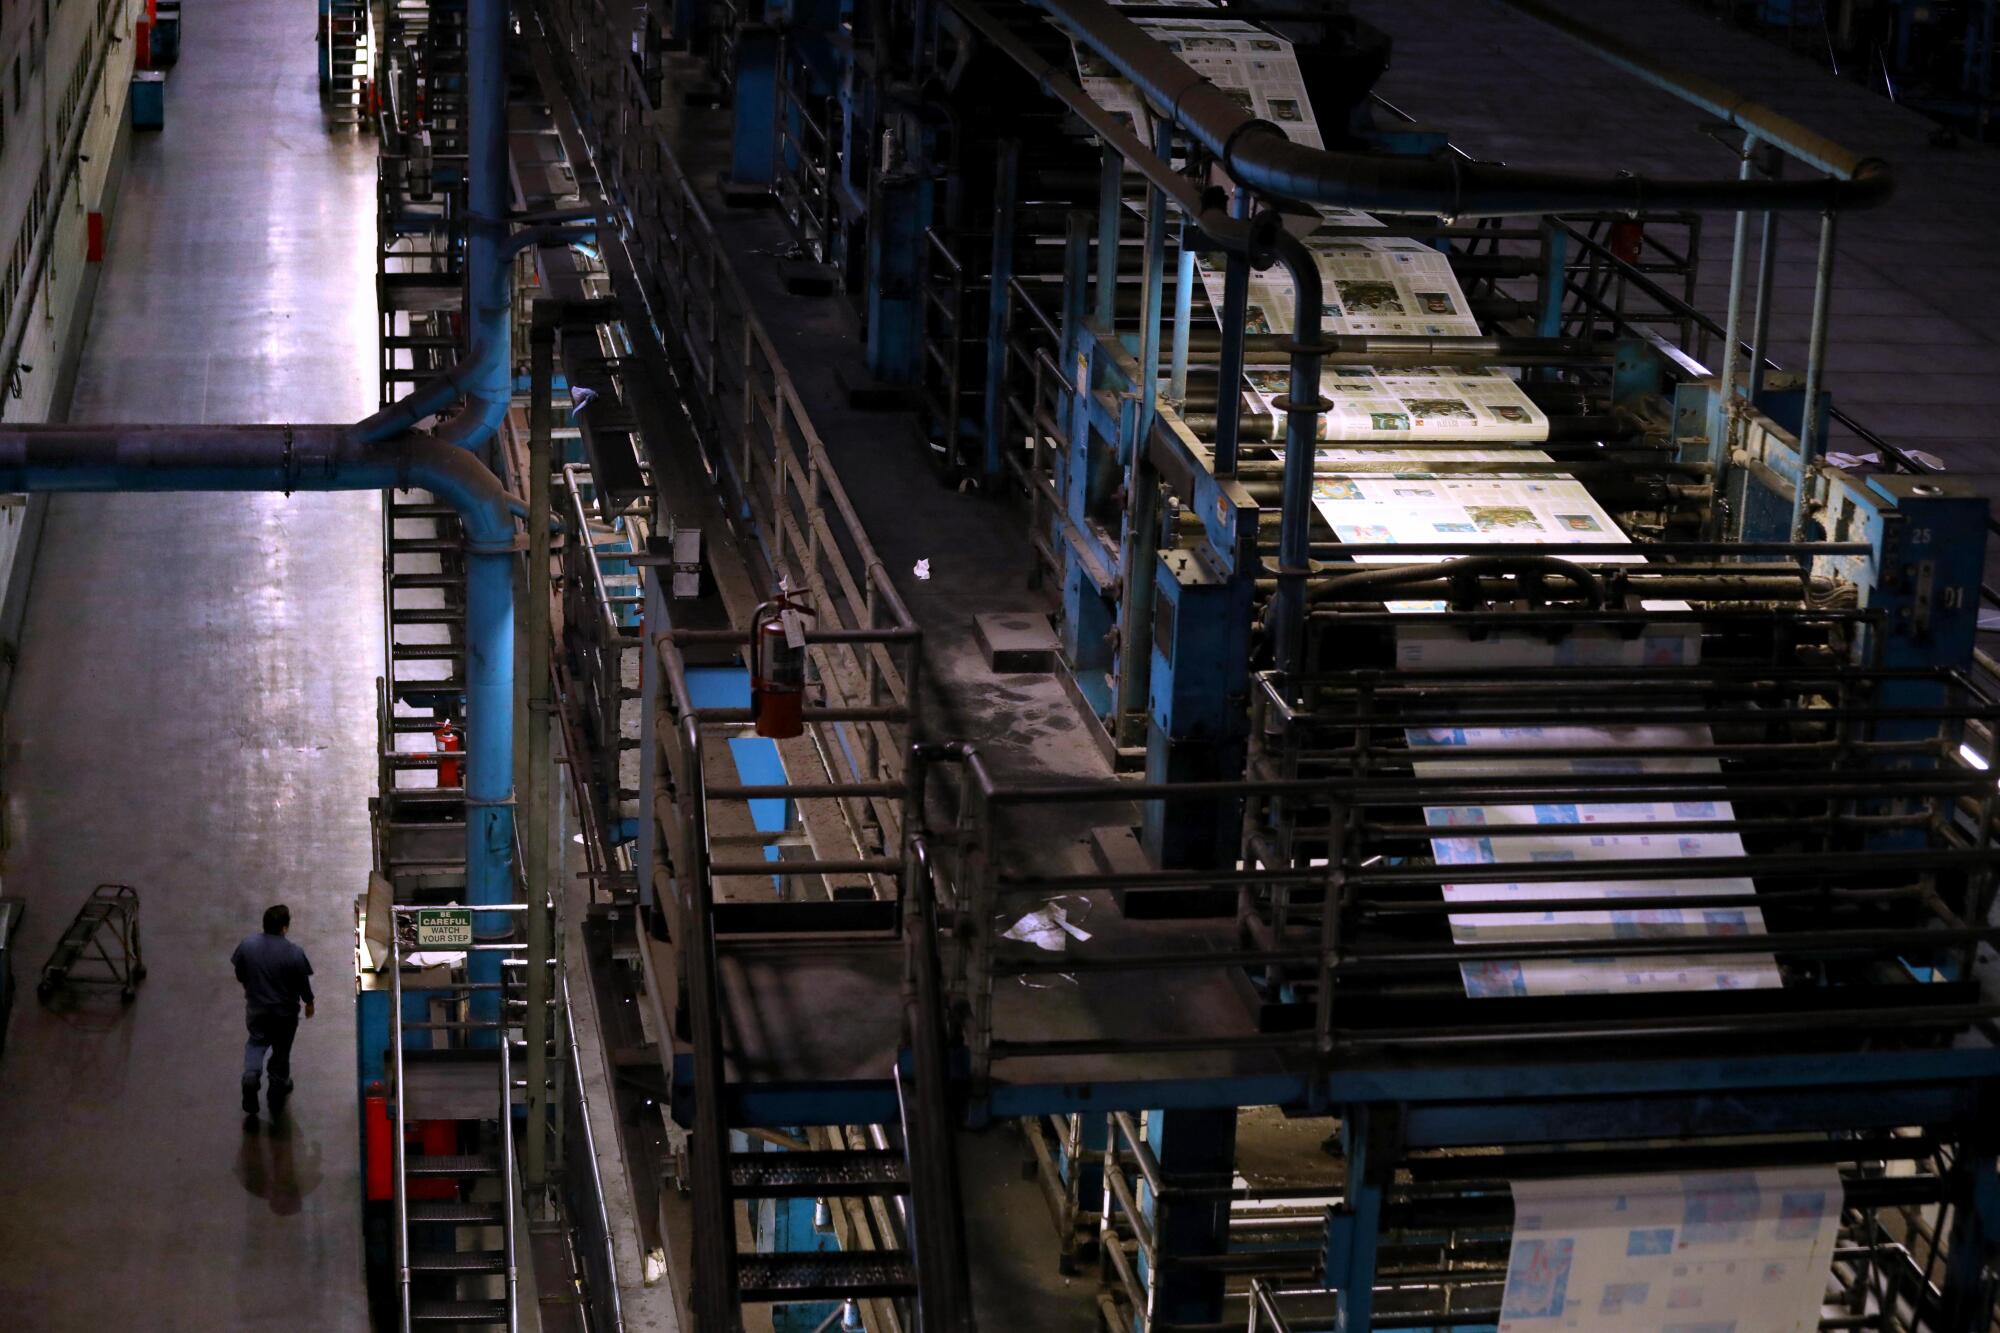 A pressman walks past presses where newspapers roll off in the final days of the Olympic printing plant.